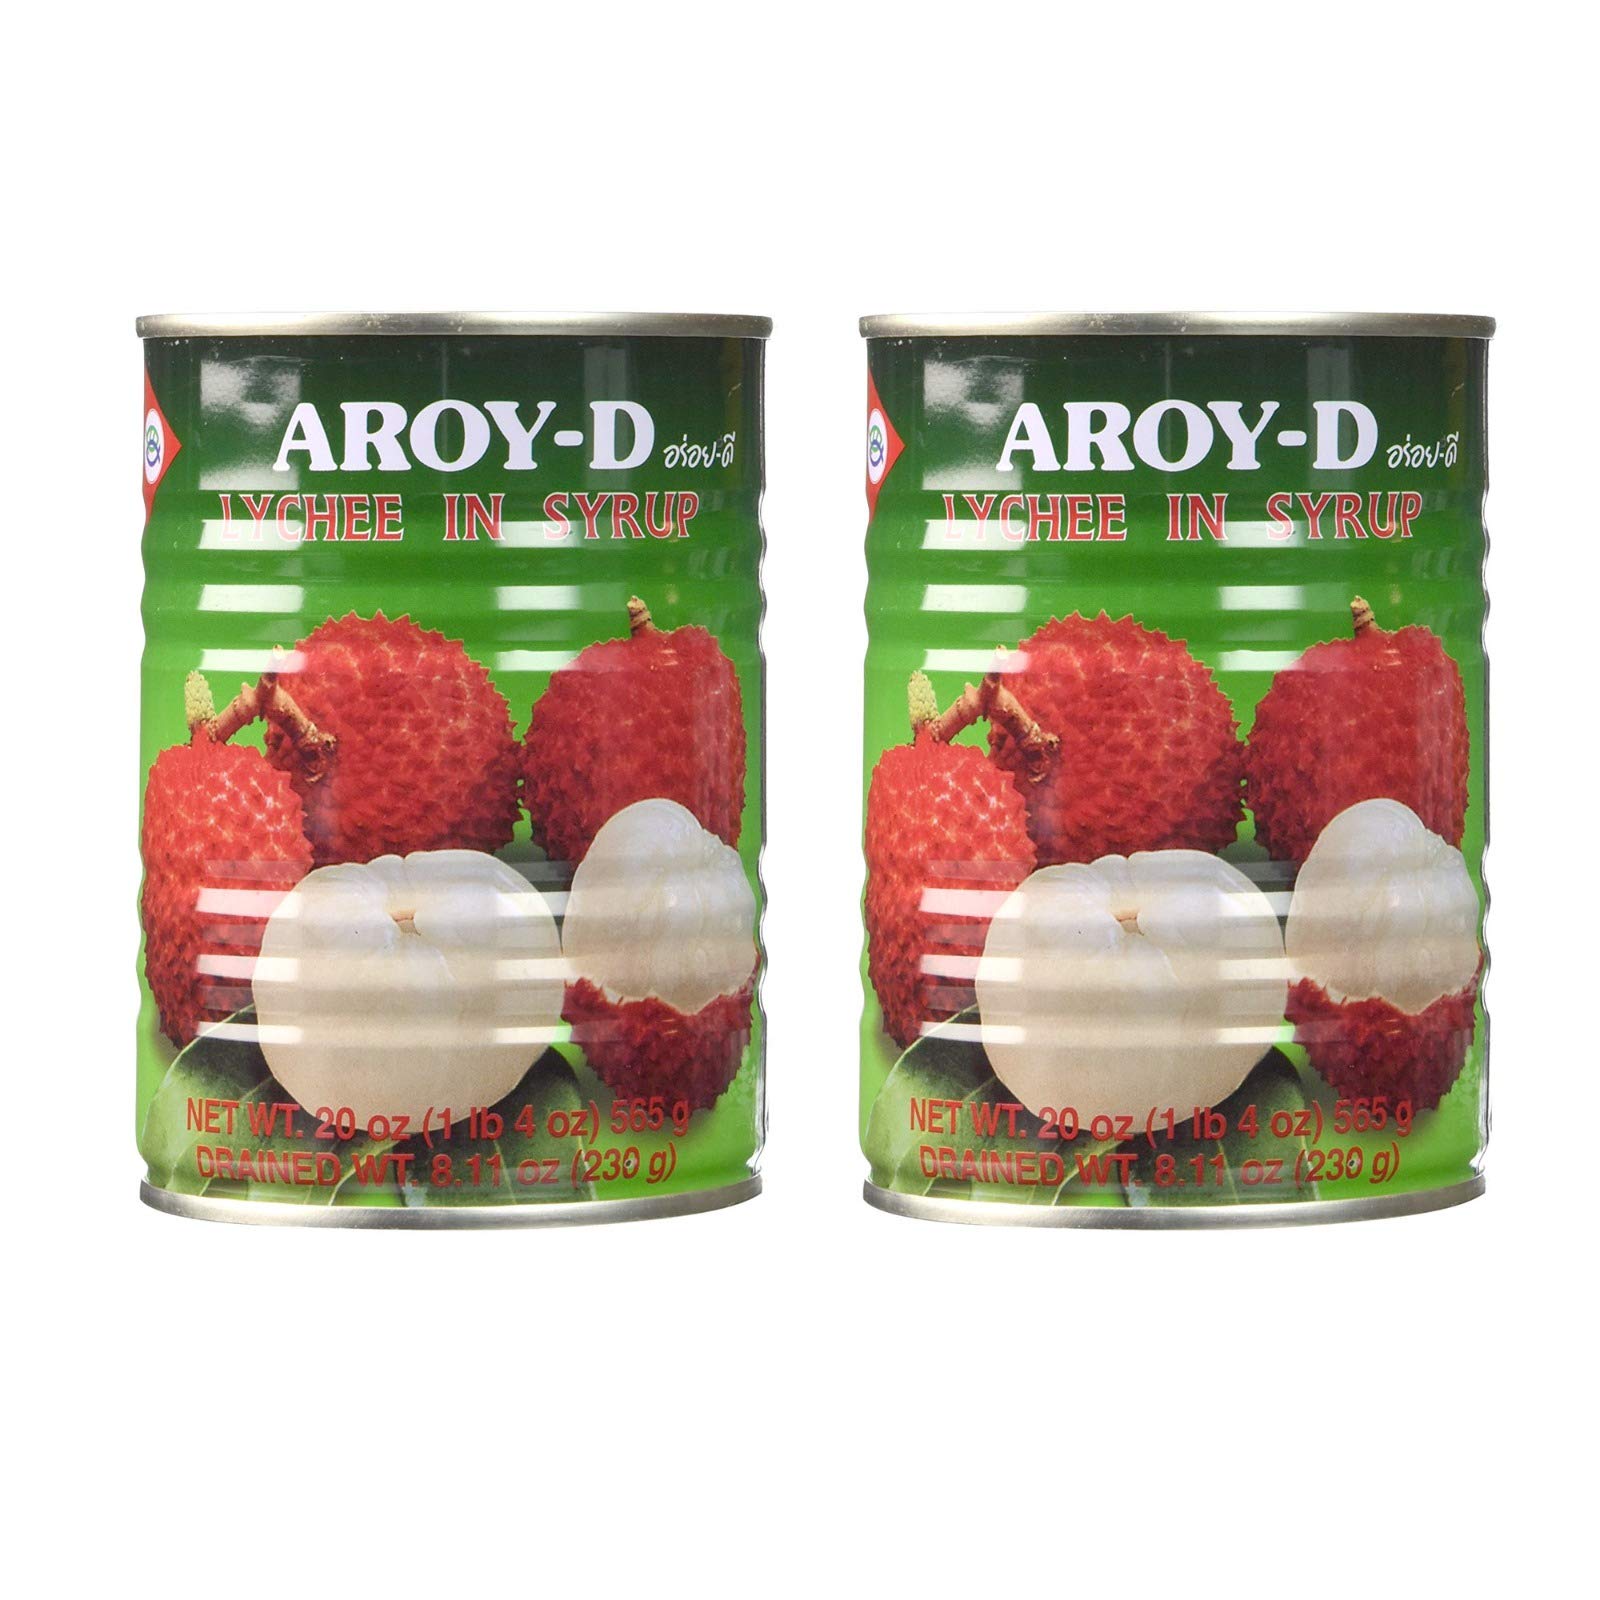 Aroy-D Canned Fruits (Lychee in Syrup, 2 Pack)